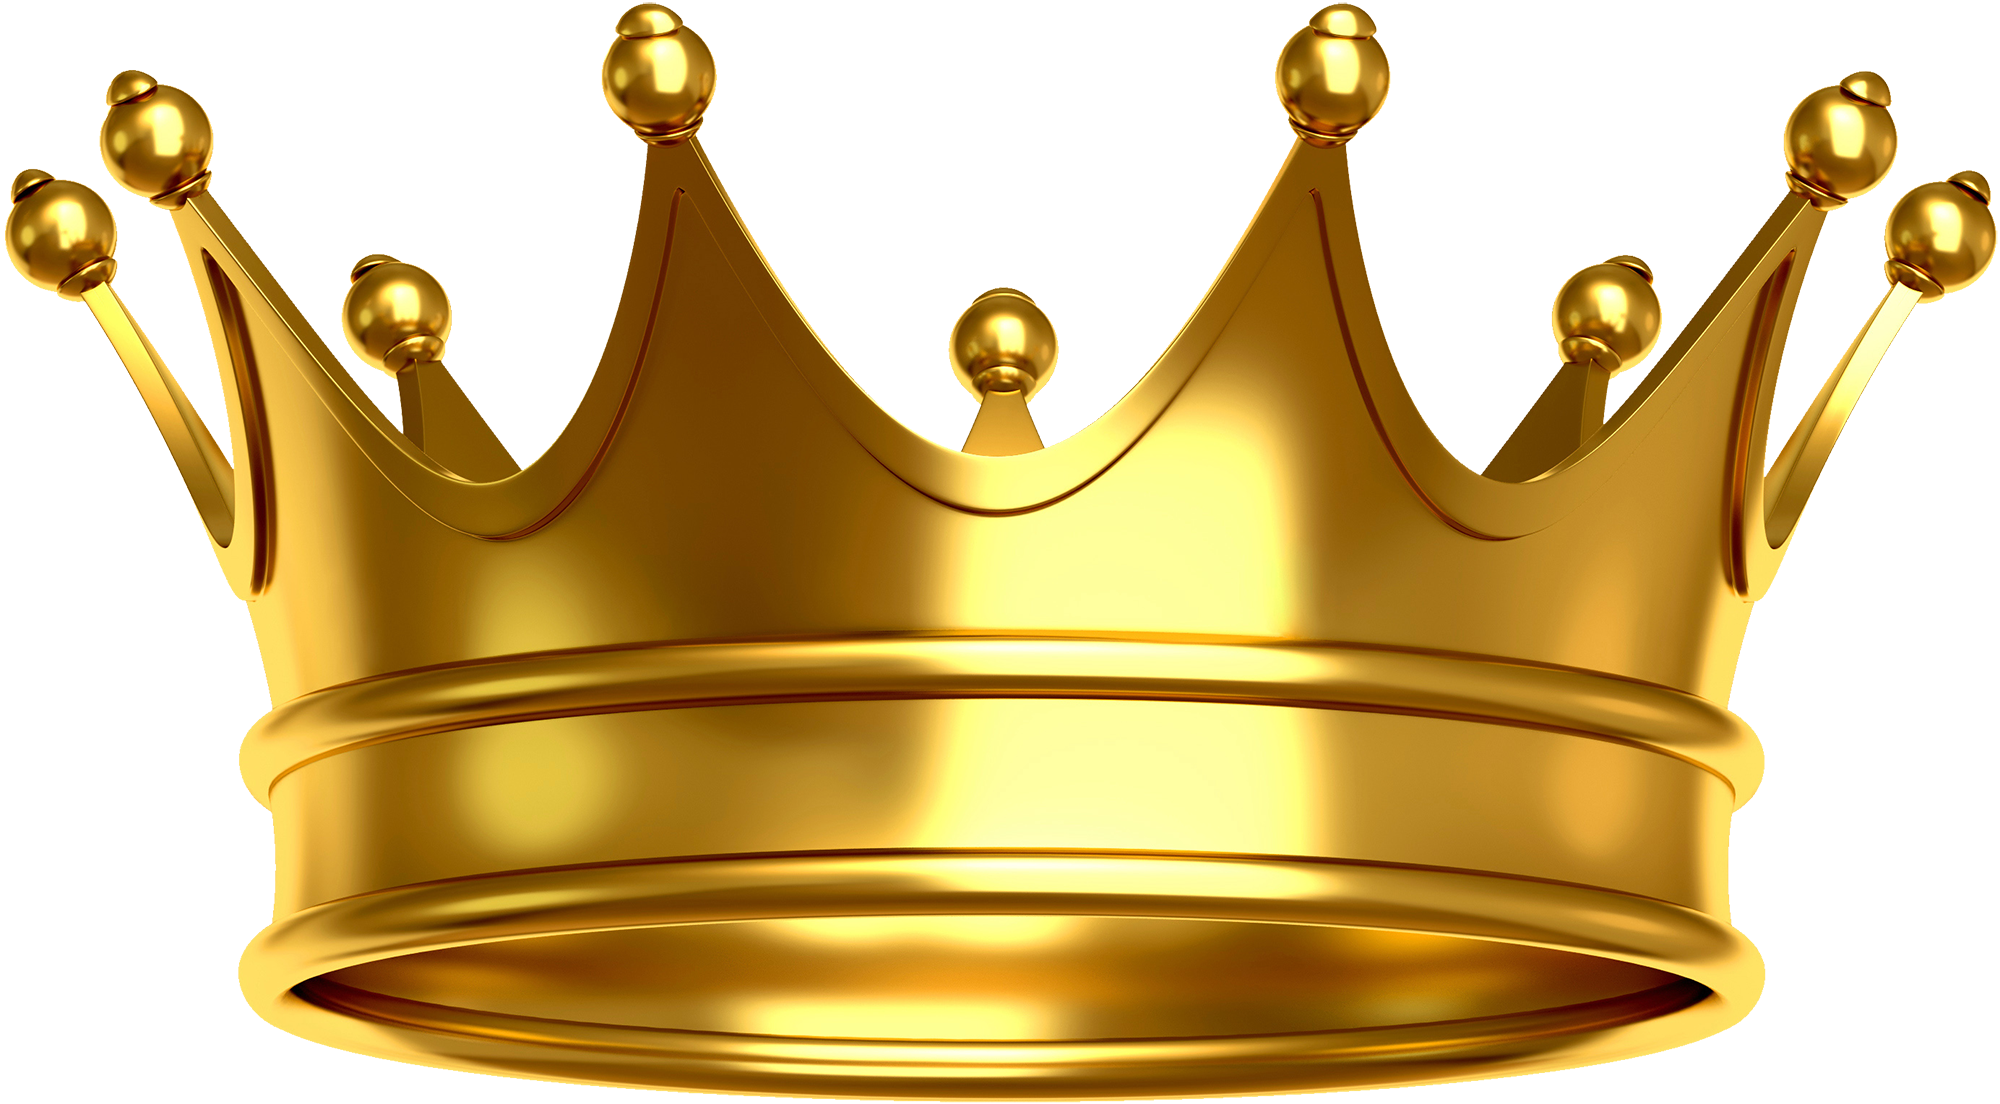 Crown PNG, King Crown, Princess Crown.PNG Images And Icons ...